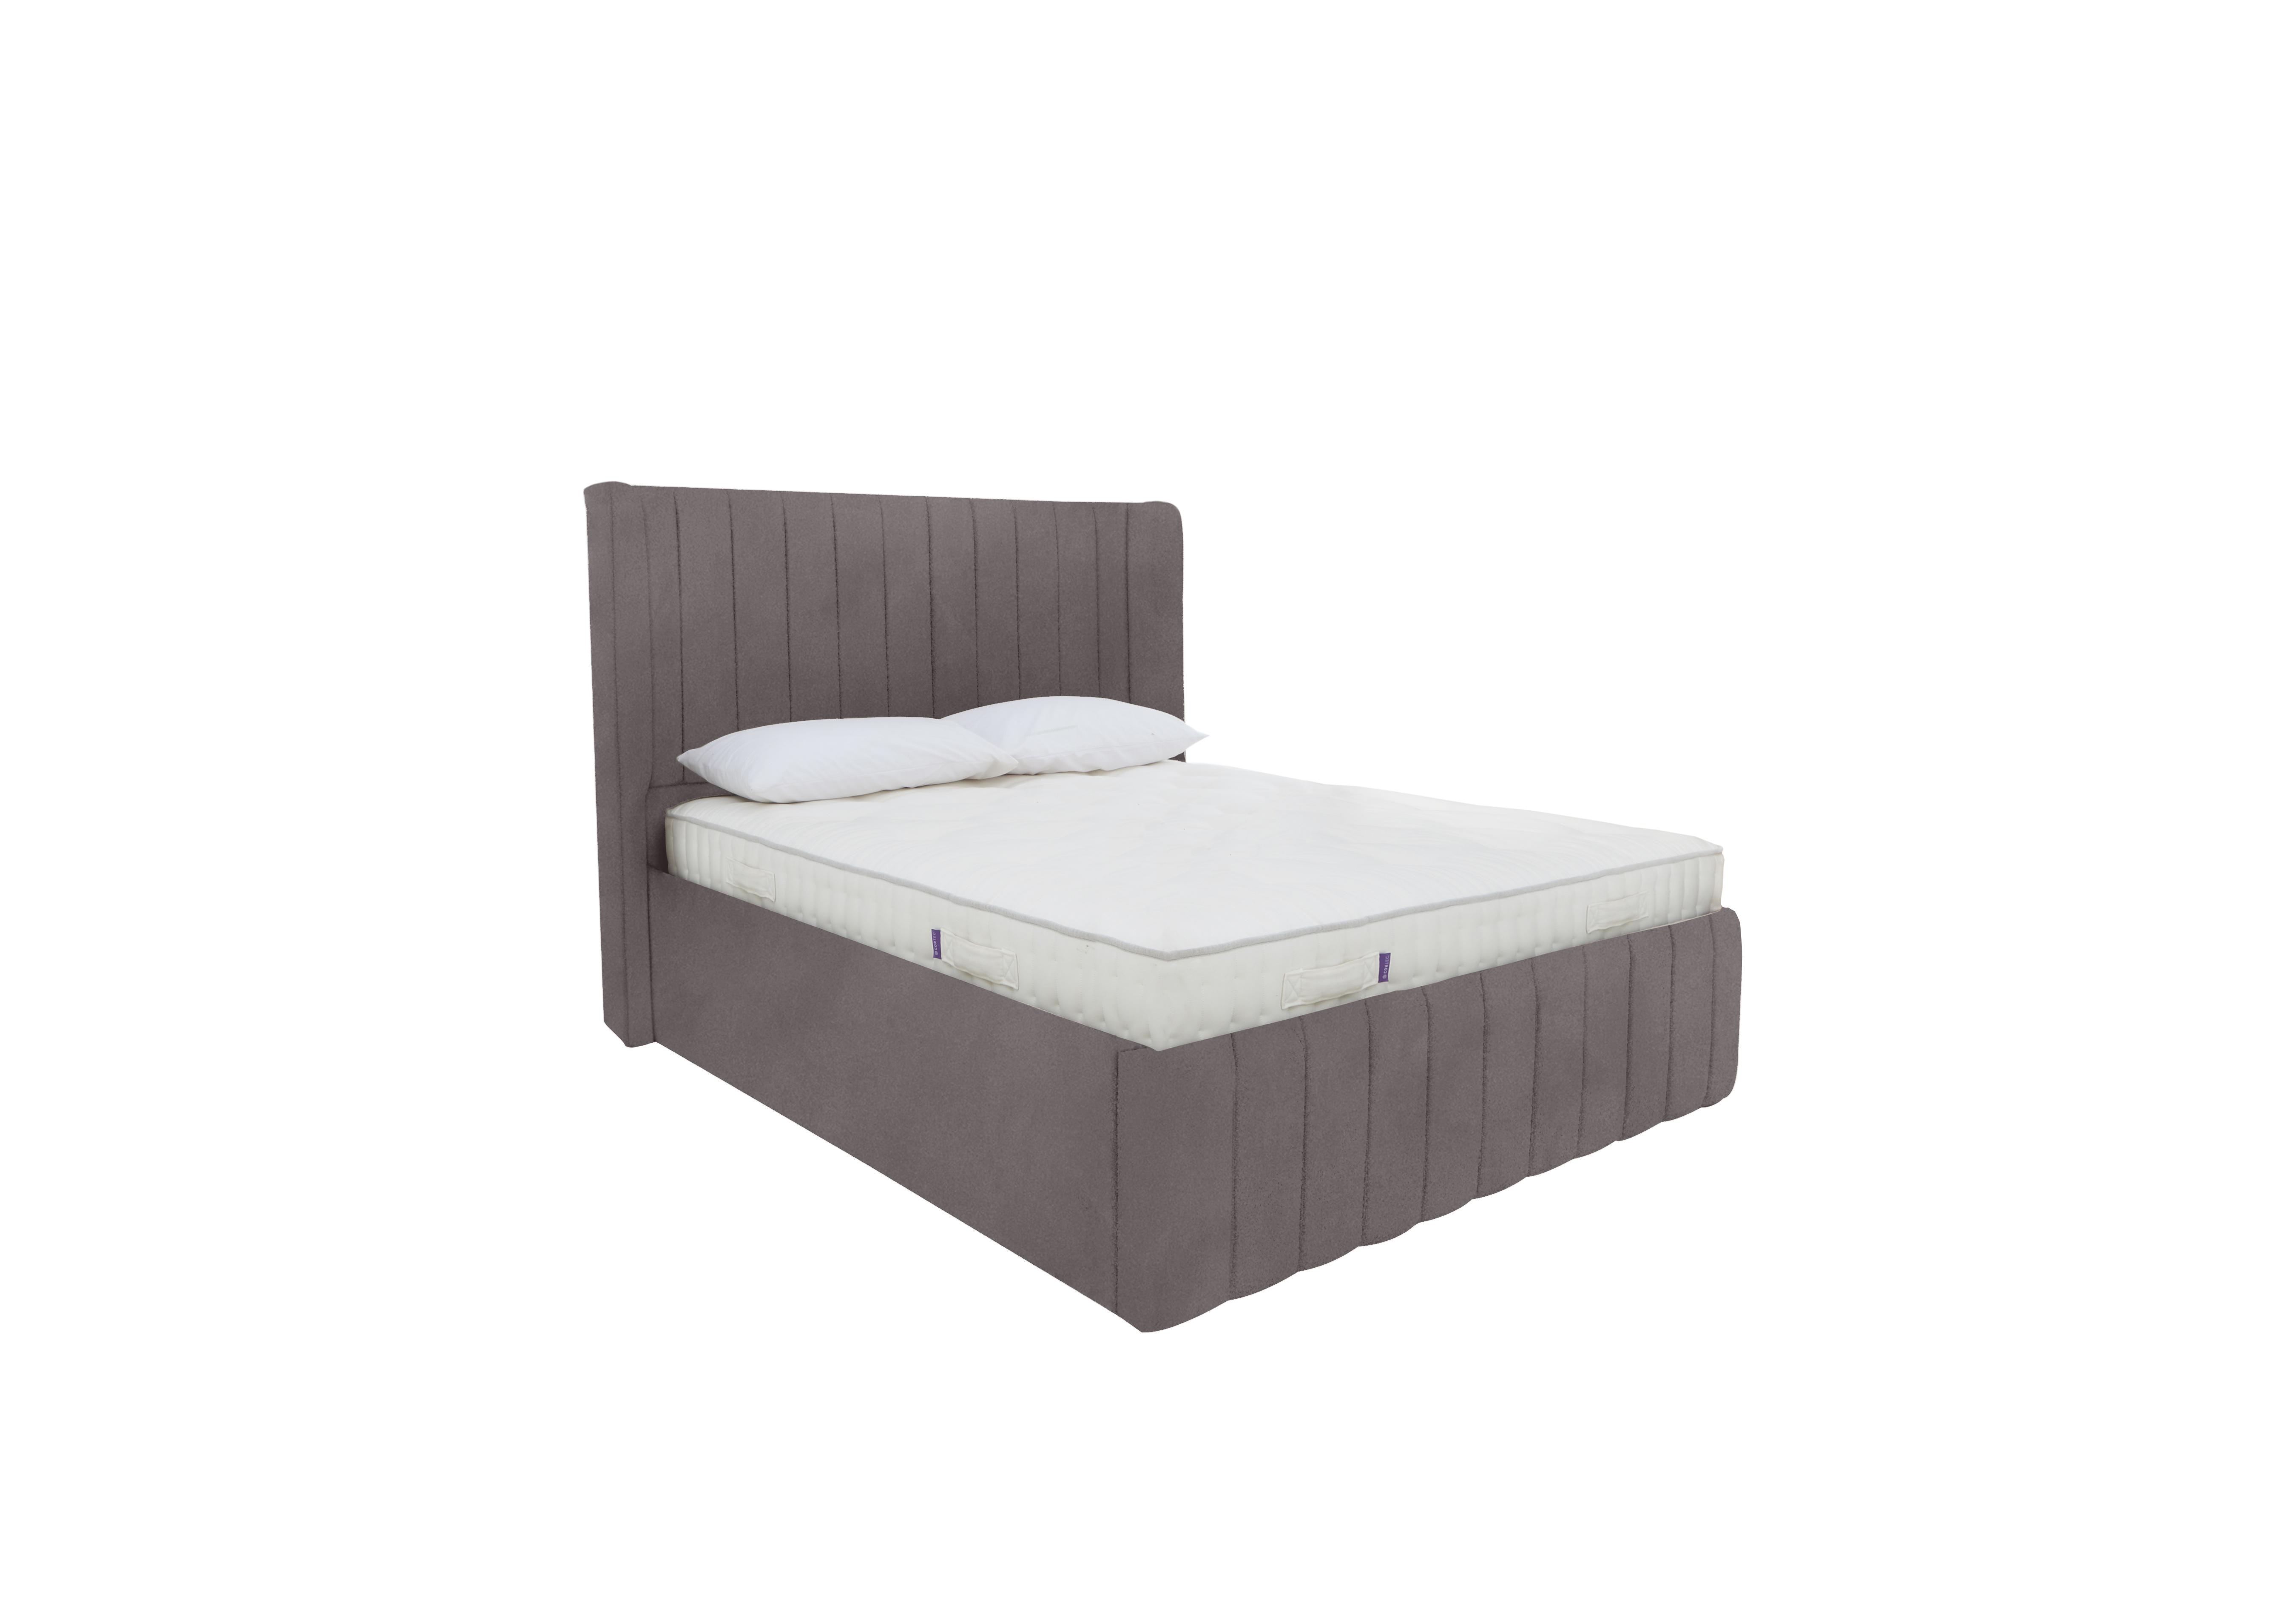 Eira Low Foot End Ottoman Bed Frame in Sanderson Storm on Furniture Village